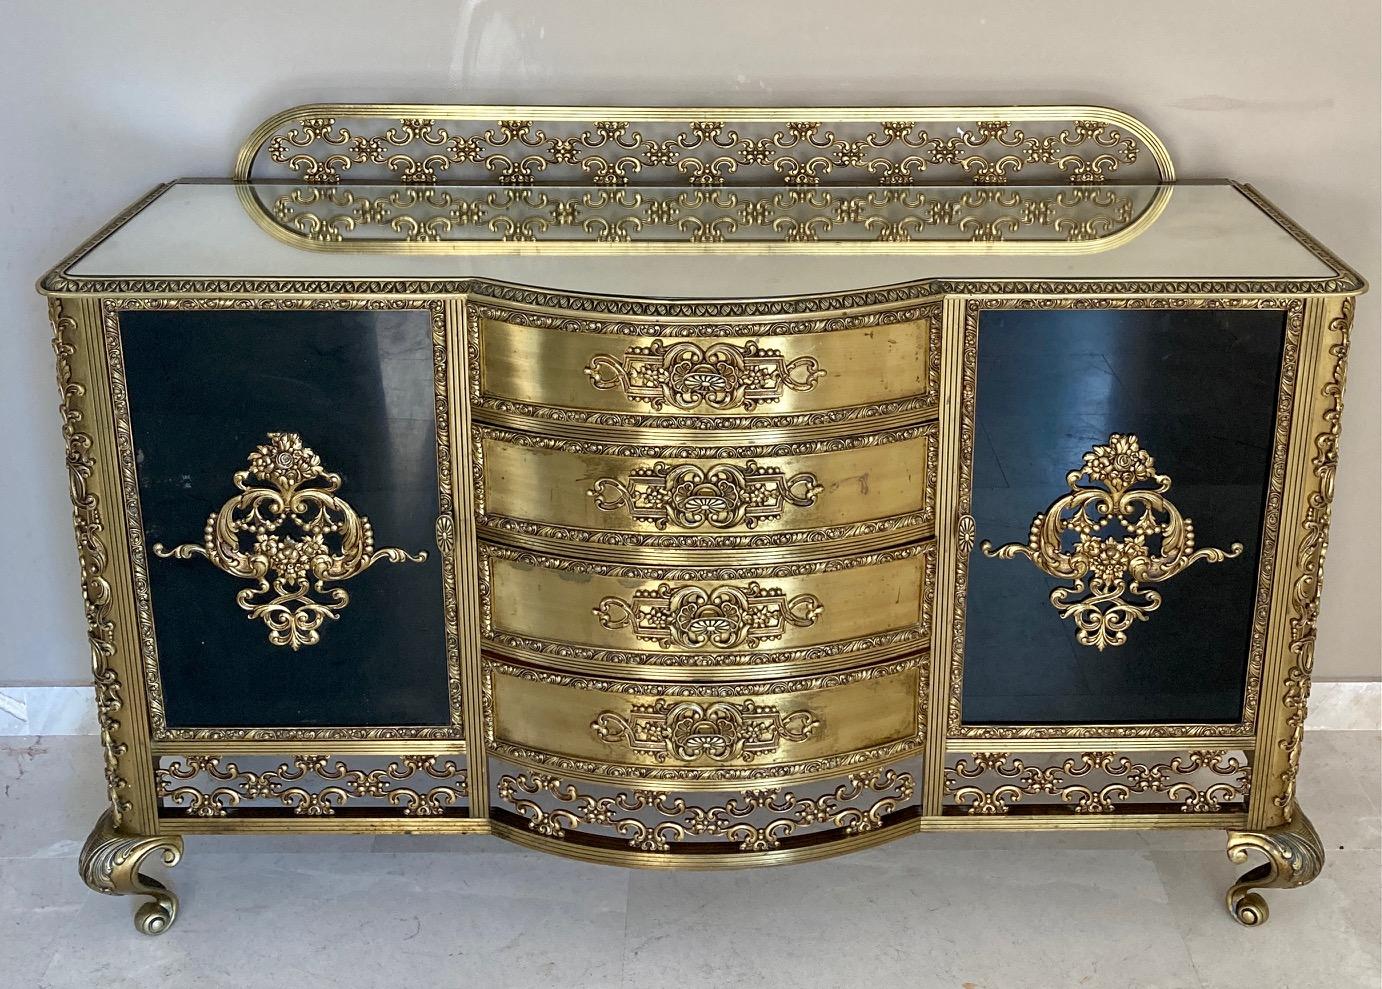 Fabulous 19th century French vanity or dressing table with bronze mirrors with four central drawers and mirror on top of the dresser. It has two black glass doors or cabinet with glass showcases and a top mirror. 
This vintage item has no defects,